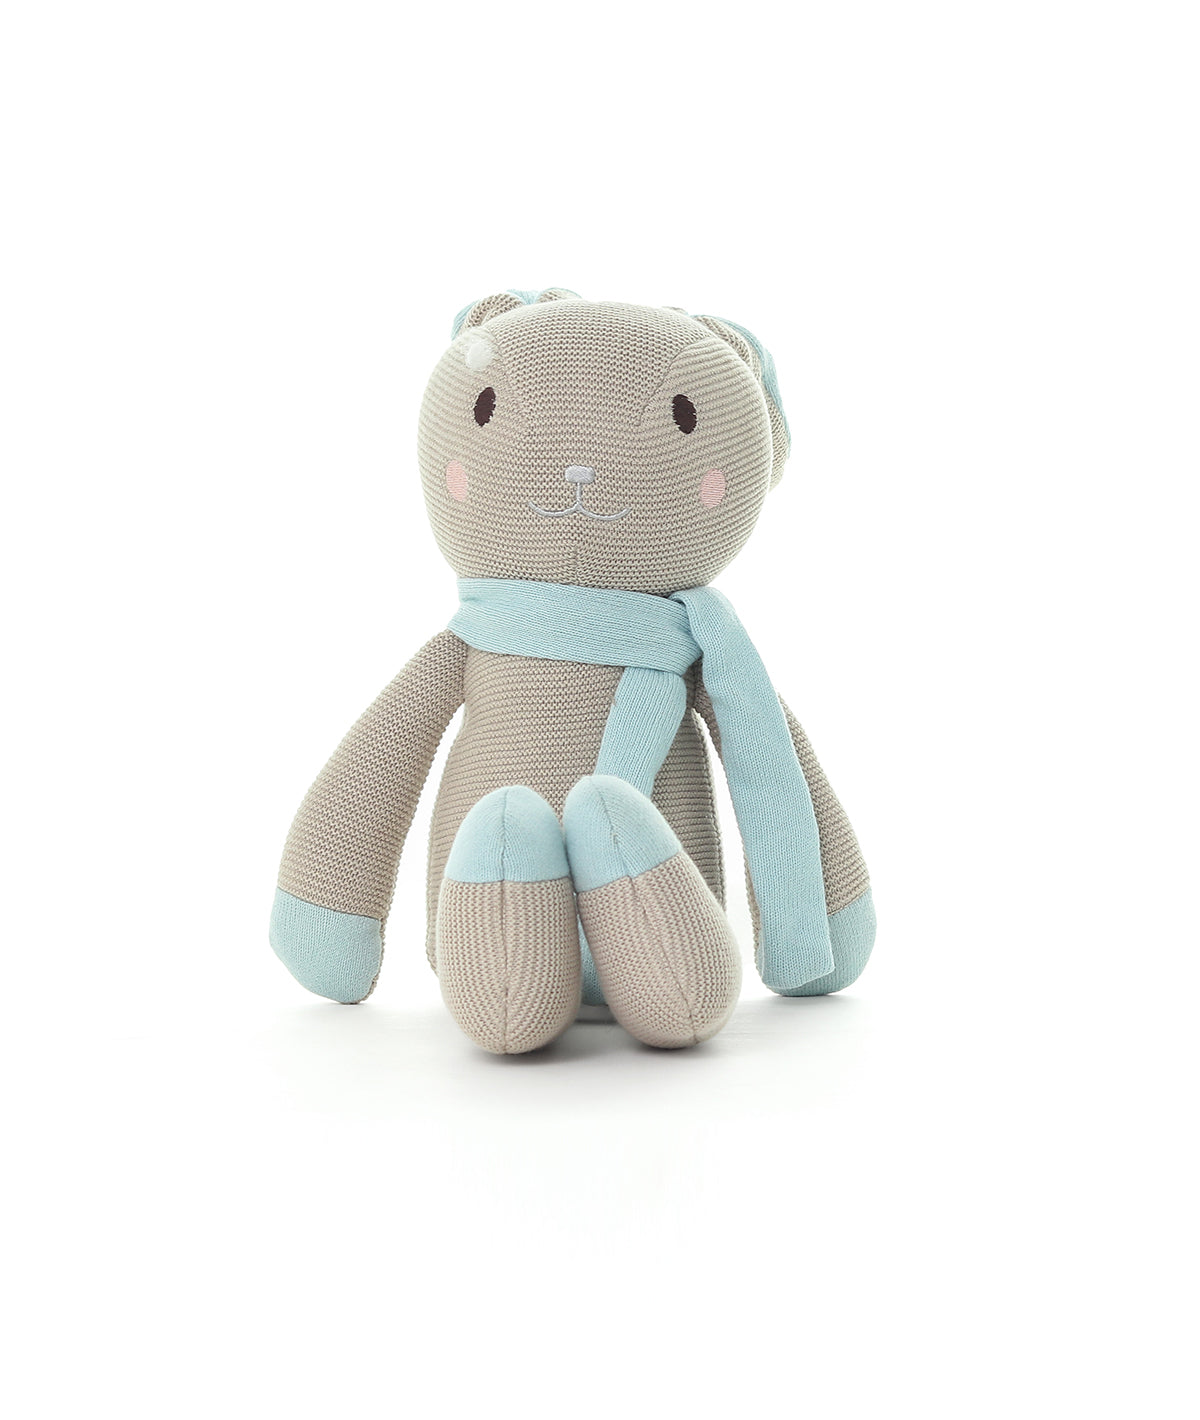 Berry Bunny Cotton Knitted Stuffed Soft Toy (Pale Whisper & Baby Blue)